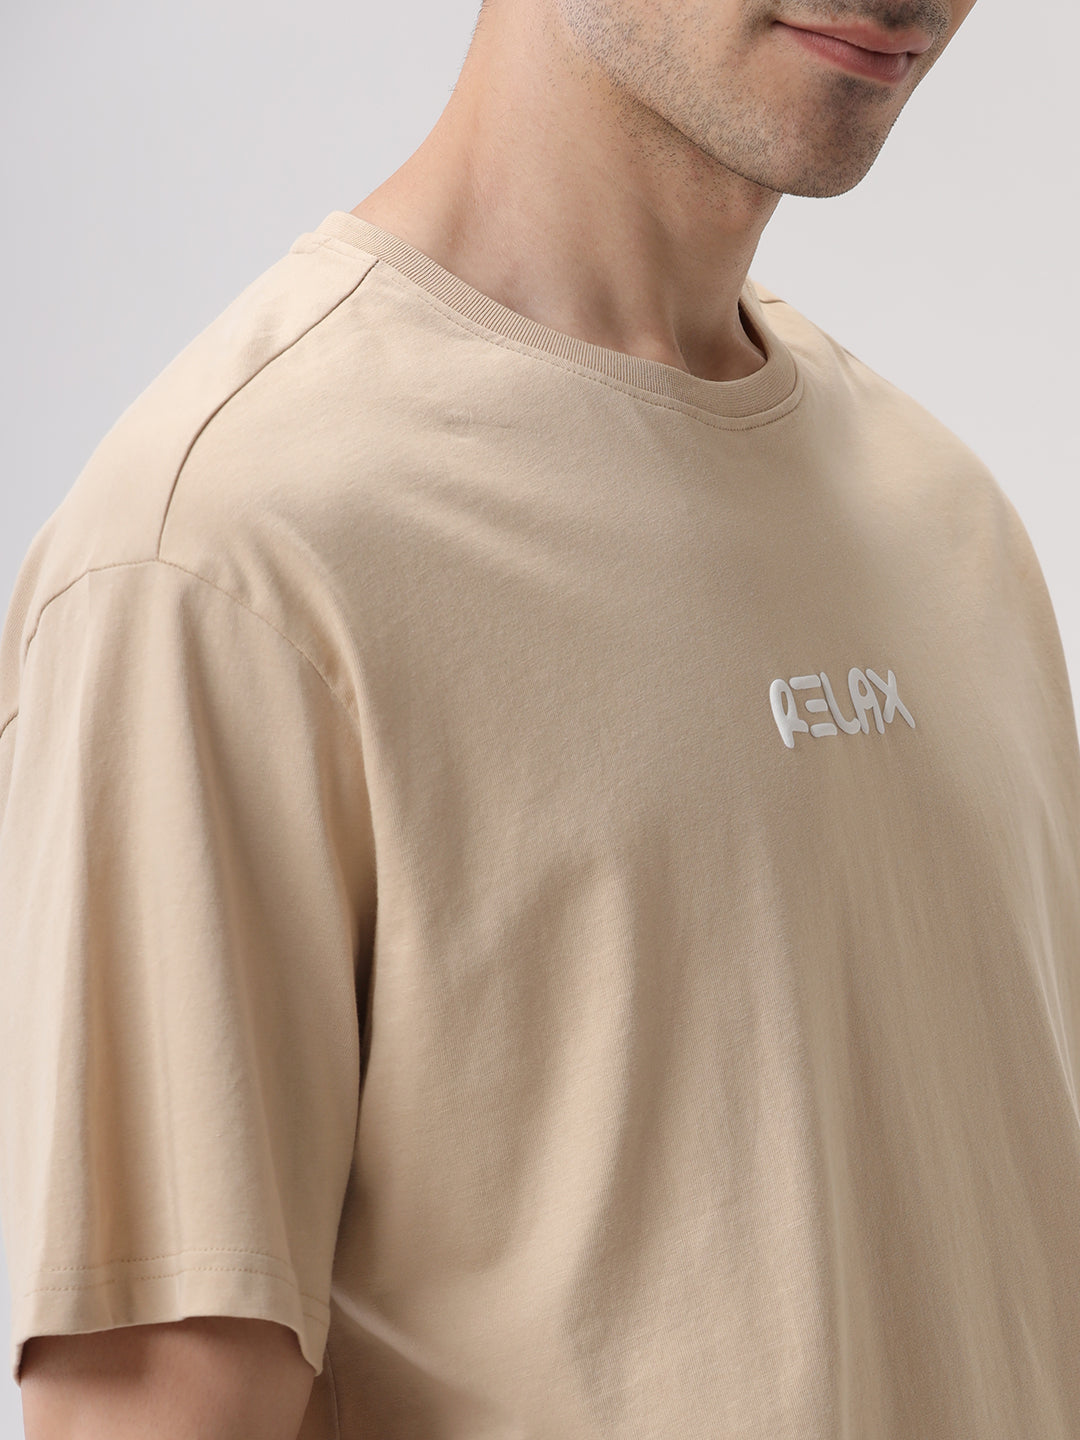 Relax Printed Beige Oversized T-Shirt